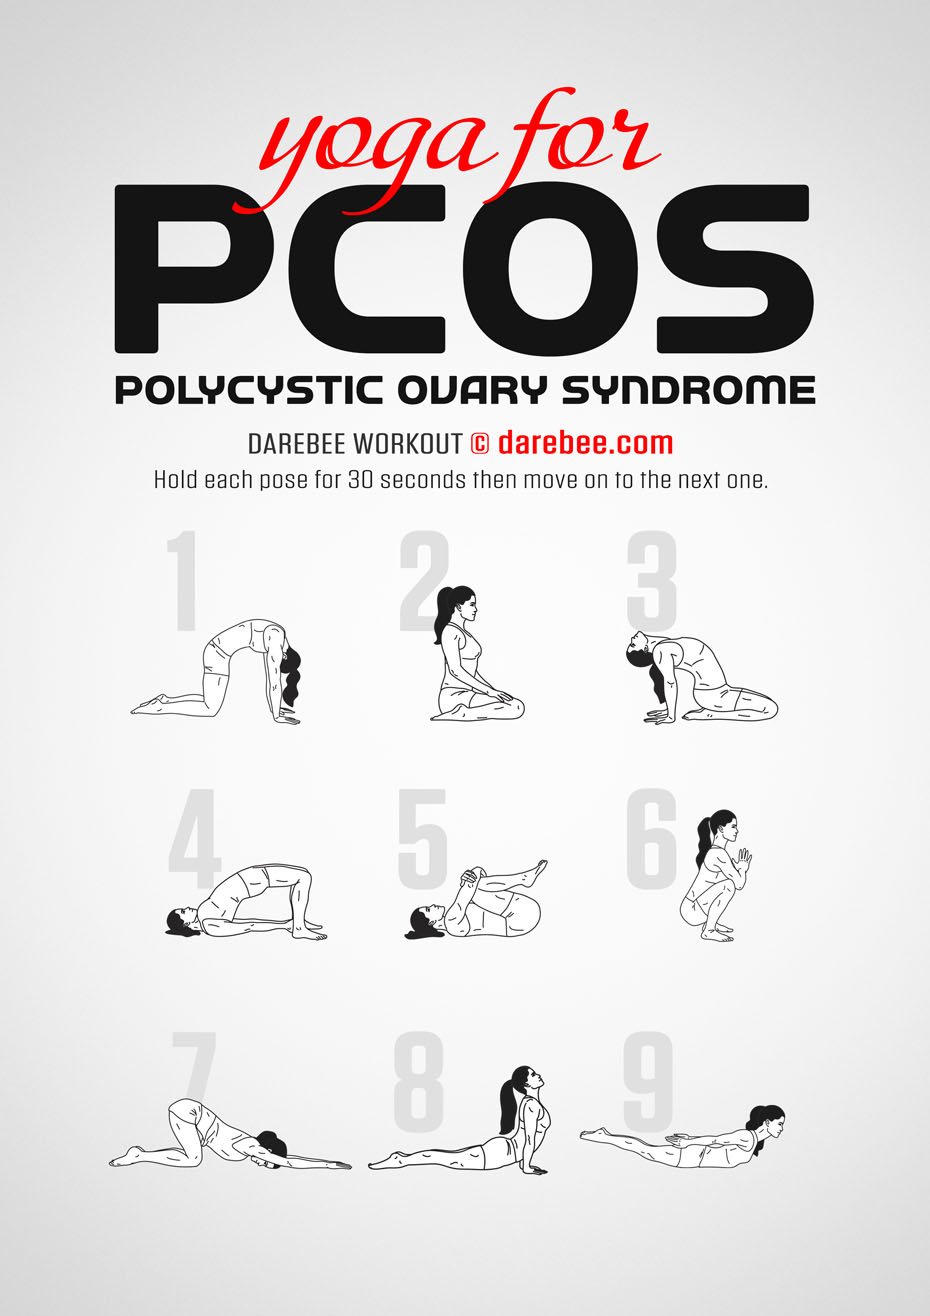 Yoga for PCOS is a Darebee home-fitness, yoga-based workout designed to help relieve polycystic ovary syndrome symptoms.